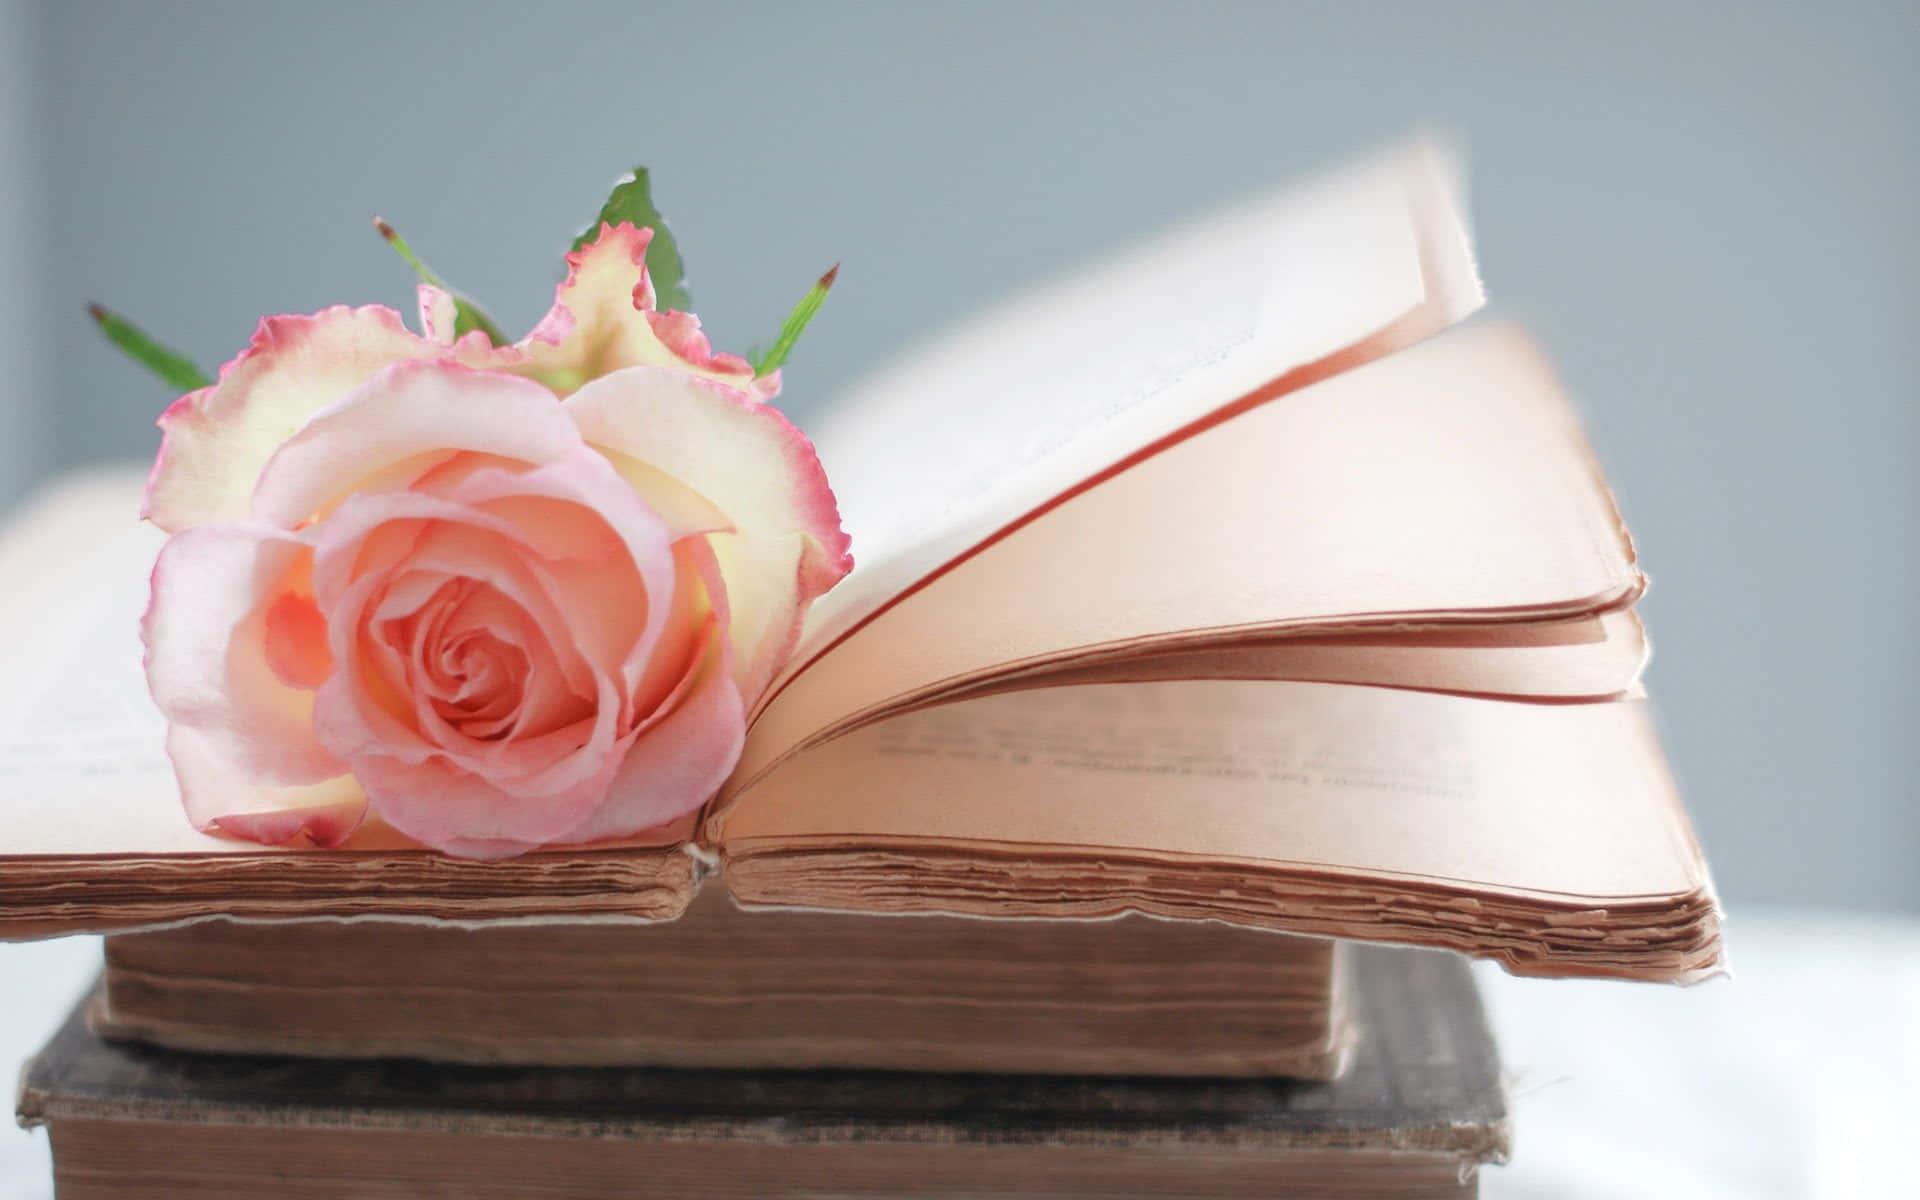 A Pink Rose Sits On Top Of An Open Book